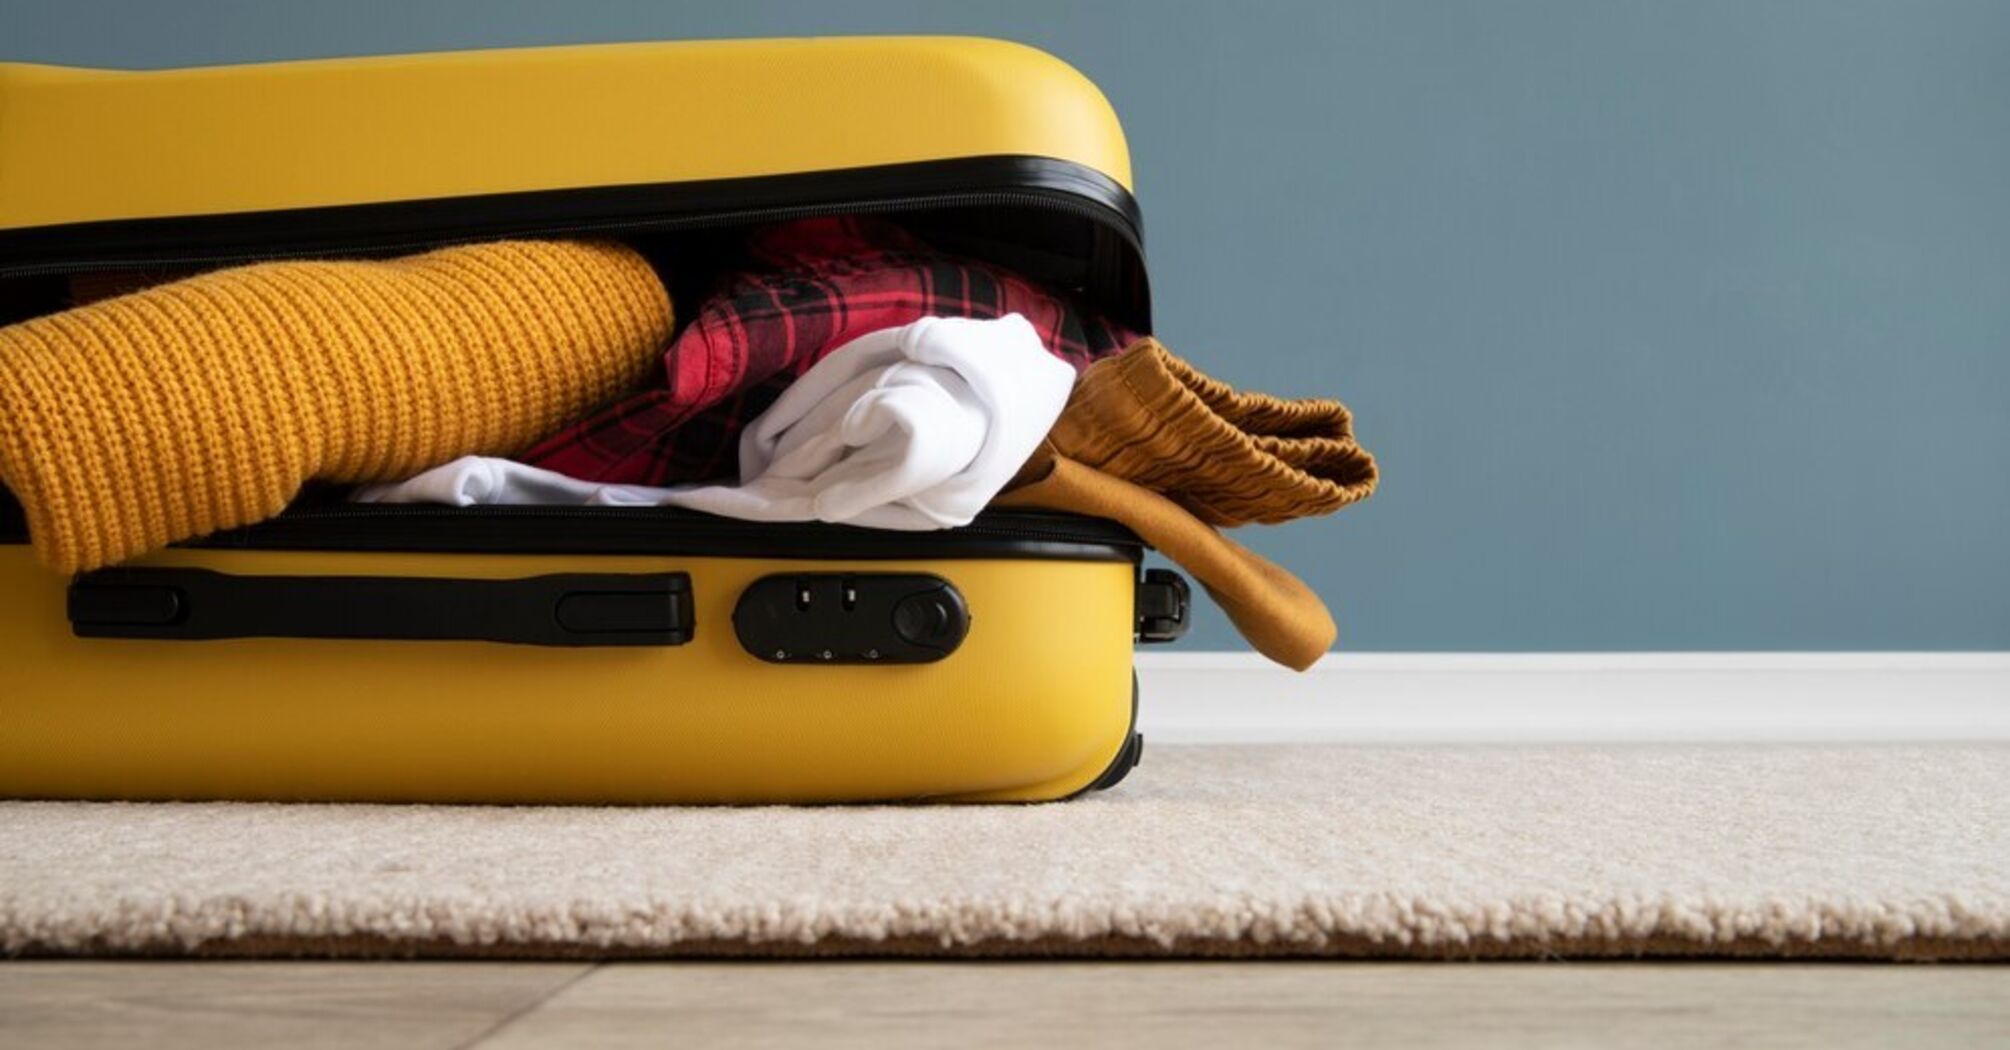 10 Tricks to help pack efficiently when traveling with carry-on luggage